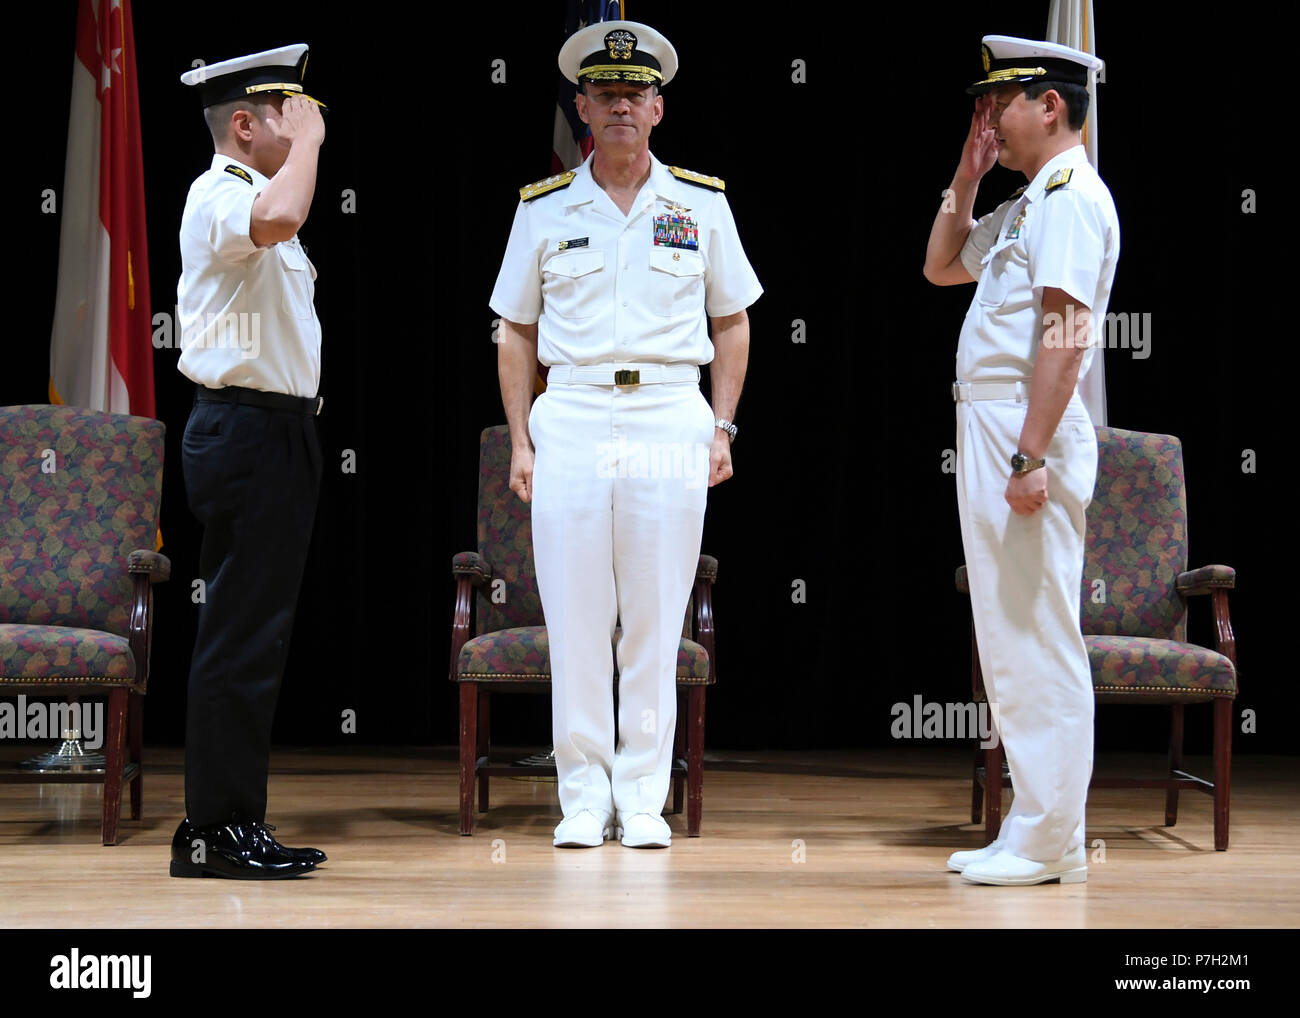 180628-N-RM440-1062 MANAMA, Bahrain (June 28, 2018) Vice Adm. Scott Stearney, middle, commander of U.S. Naval Forces Central Command, U.S. 5th Fleet and Combined Maritime Forces,  presides over a change of command between Republic of Singapore Navy Rear Adm. Saw Shi Tat, incoming commander of Combined Task Force (CTF) 151 left, and Japan Maritime Self-Defense Force Rear Adm. Daisuke Kajimoto, outgoing commander of Combined Task Force (CTF) 151 during the task force's change of command ceremony on Naval Support Activity Bahrain. CTF 151's mission is to disrupt piracy at sea and to engage with r Stock Photo